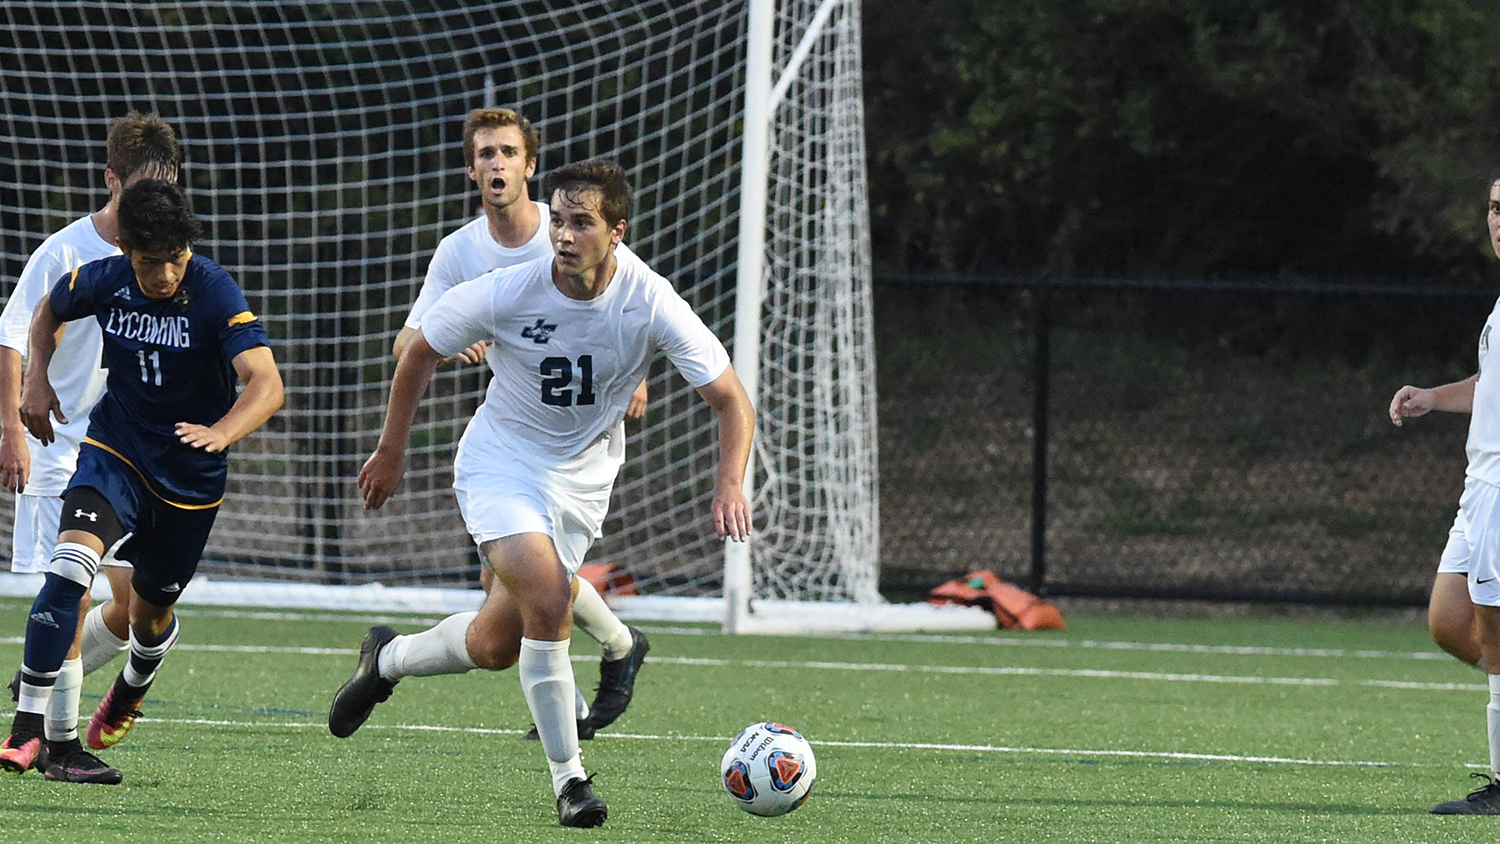 Gibson, Kulig Score in Loss to Mt. Aloysius